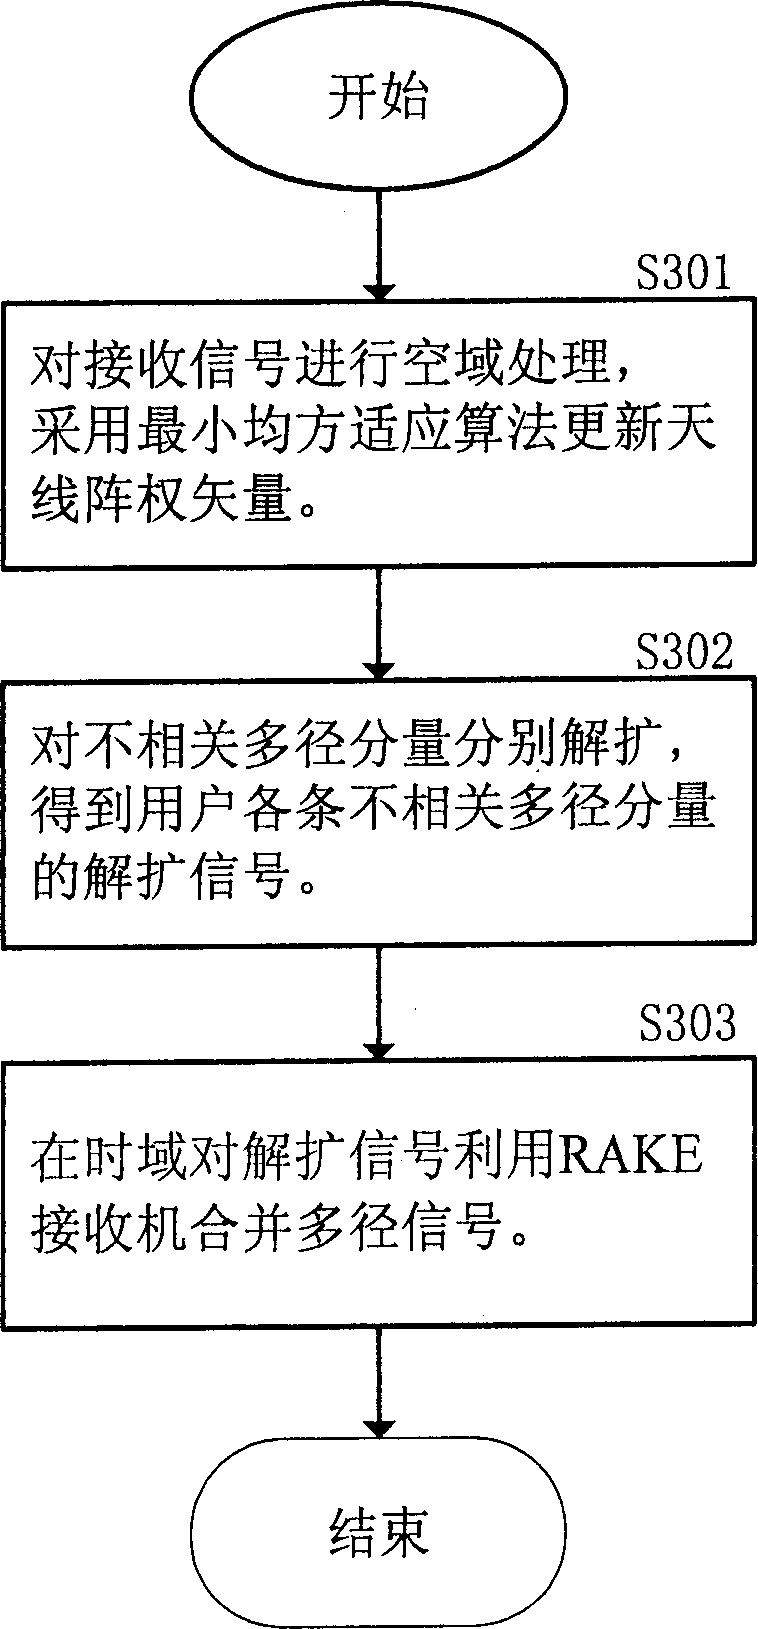 Association processing method for beam formation and rake reception in CDMA